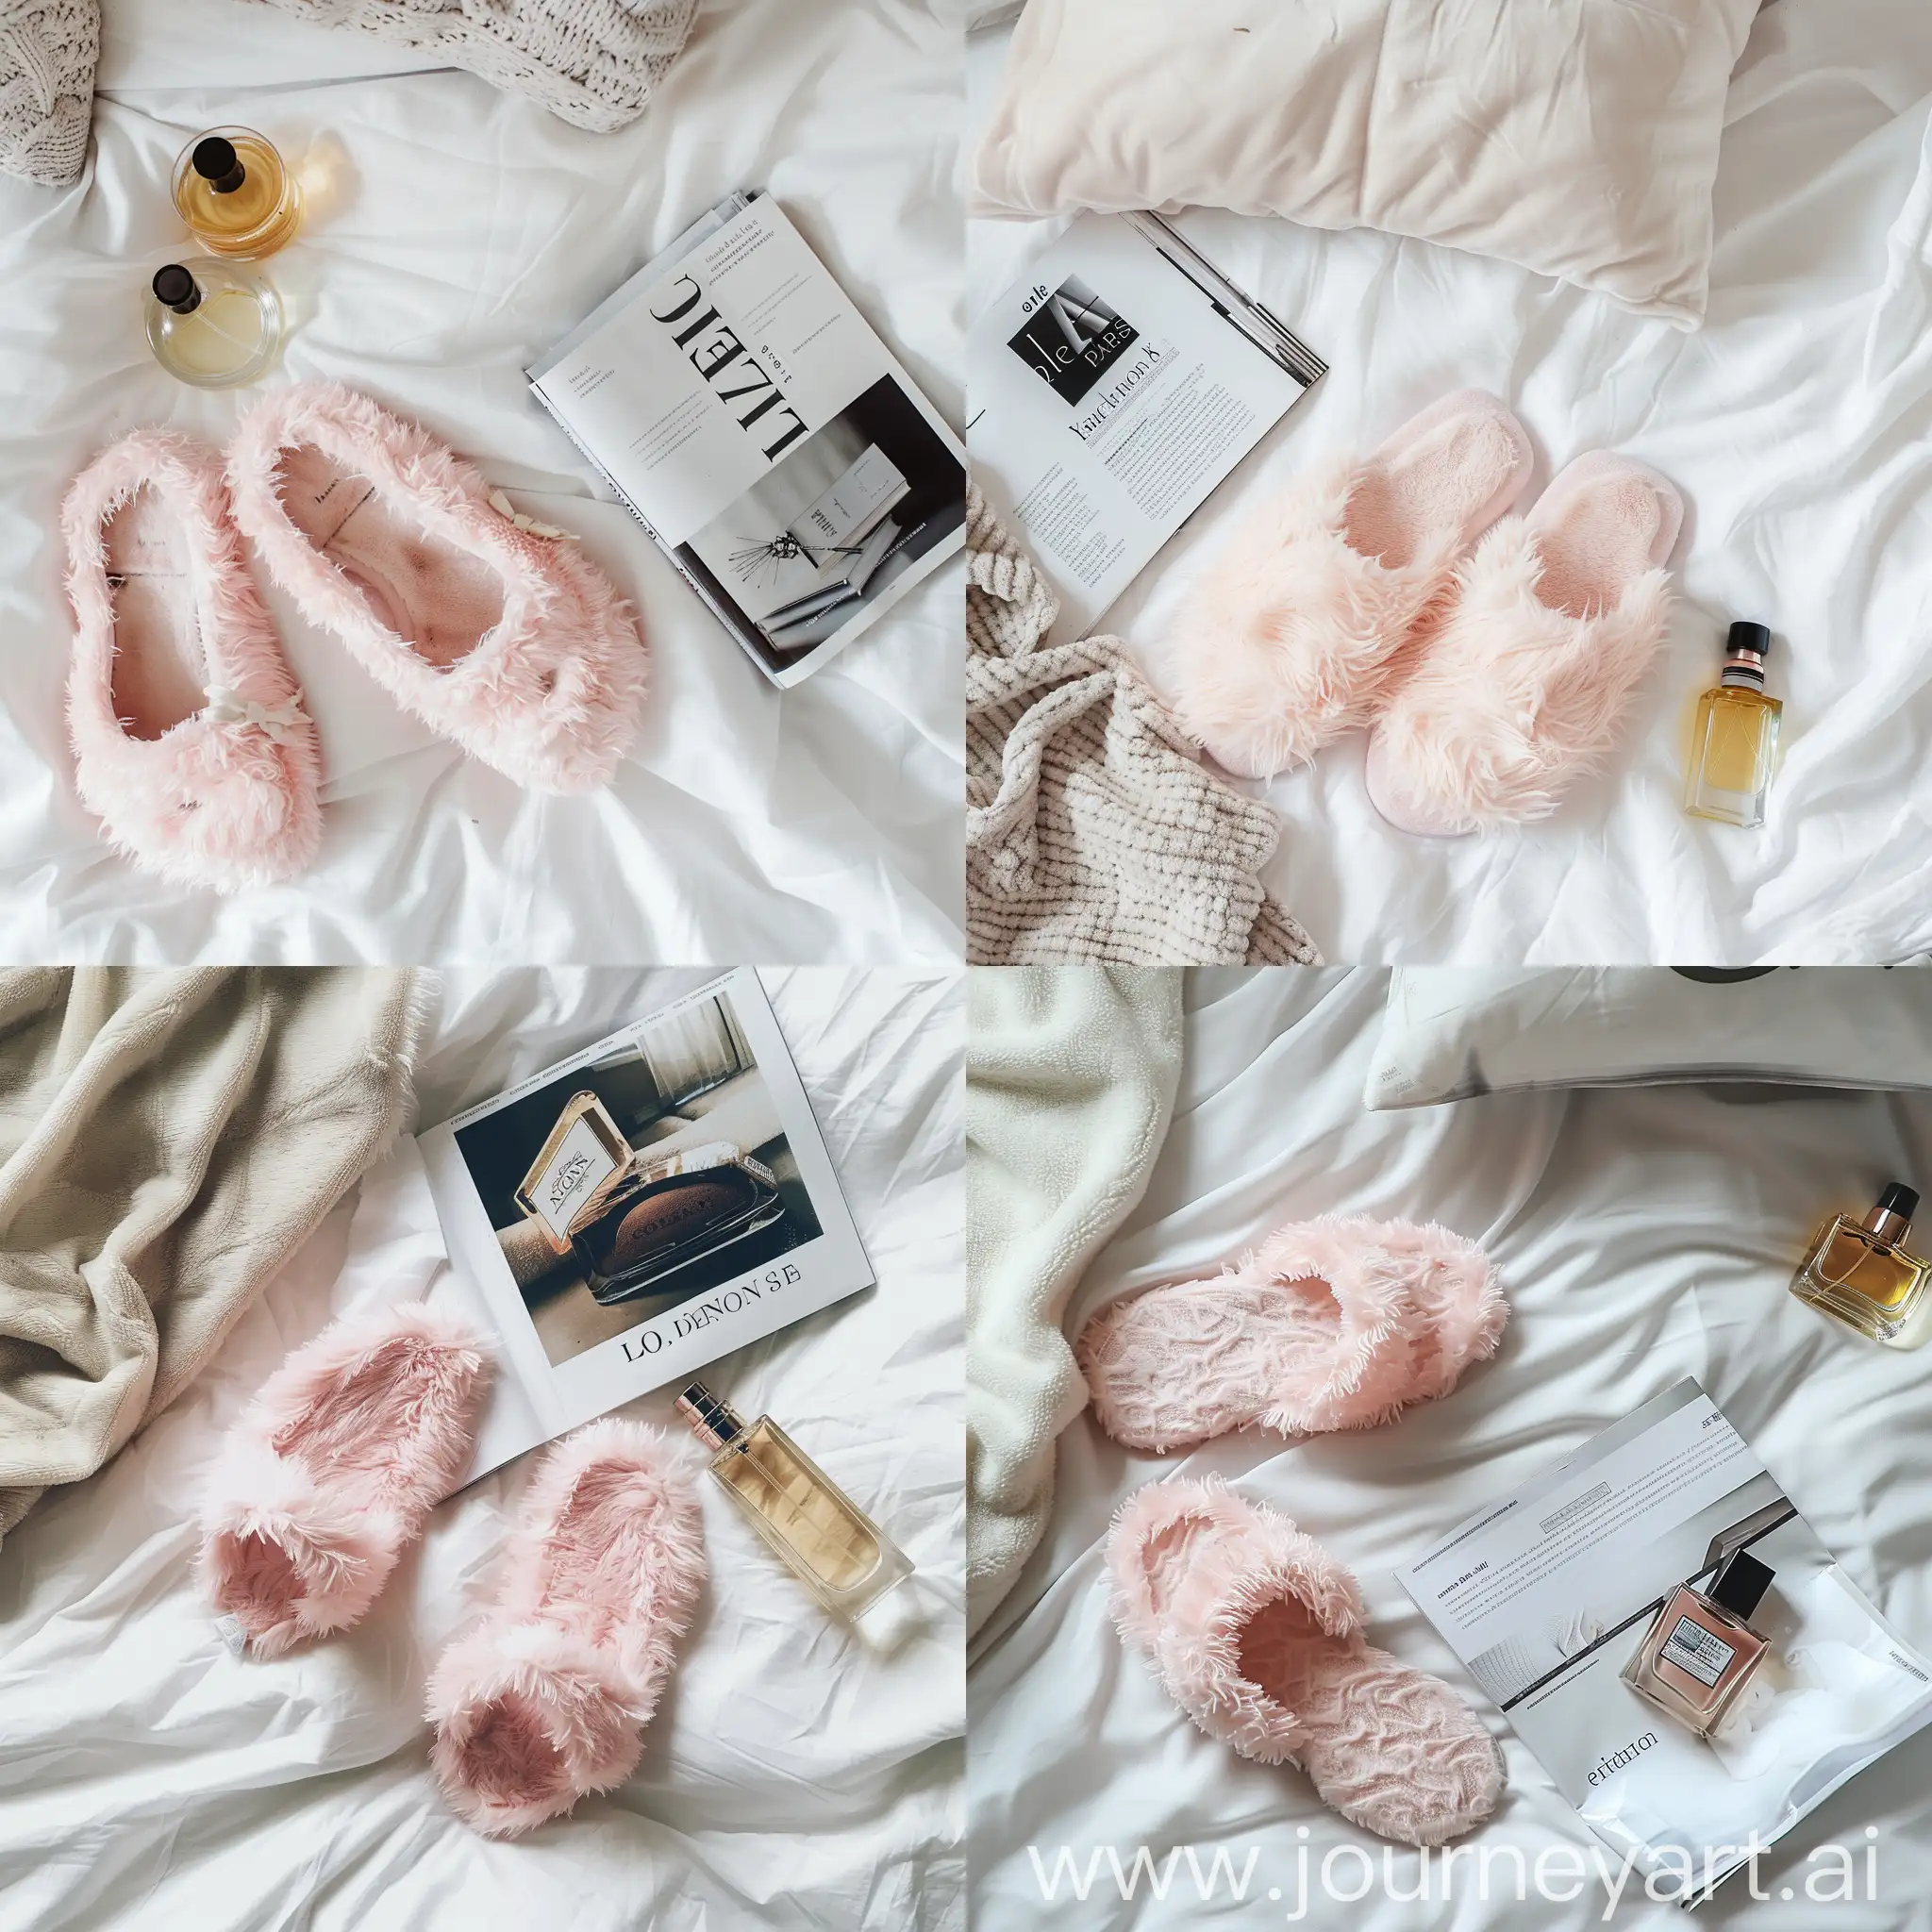 Cozy-Pink-Fluffy-Slippers-on-White-Sheet-with-Magazine-and-Perfume